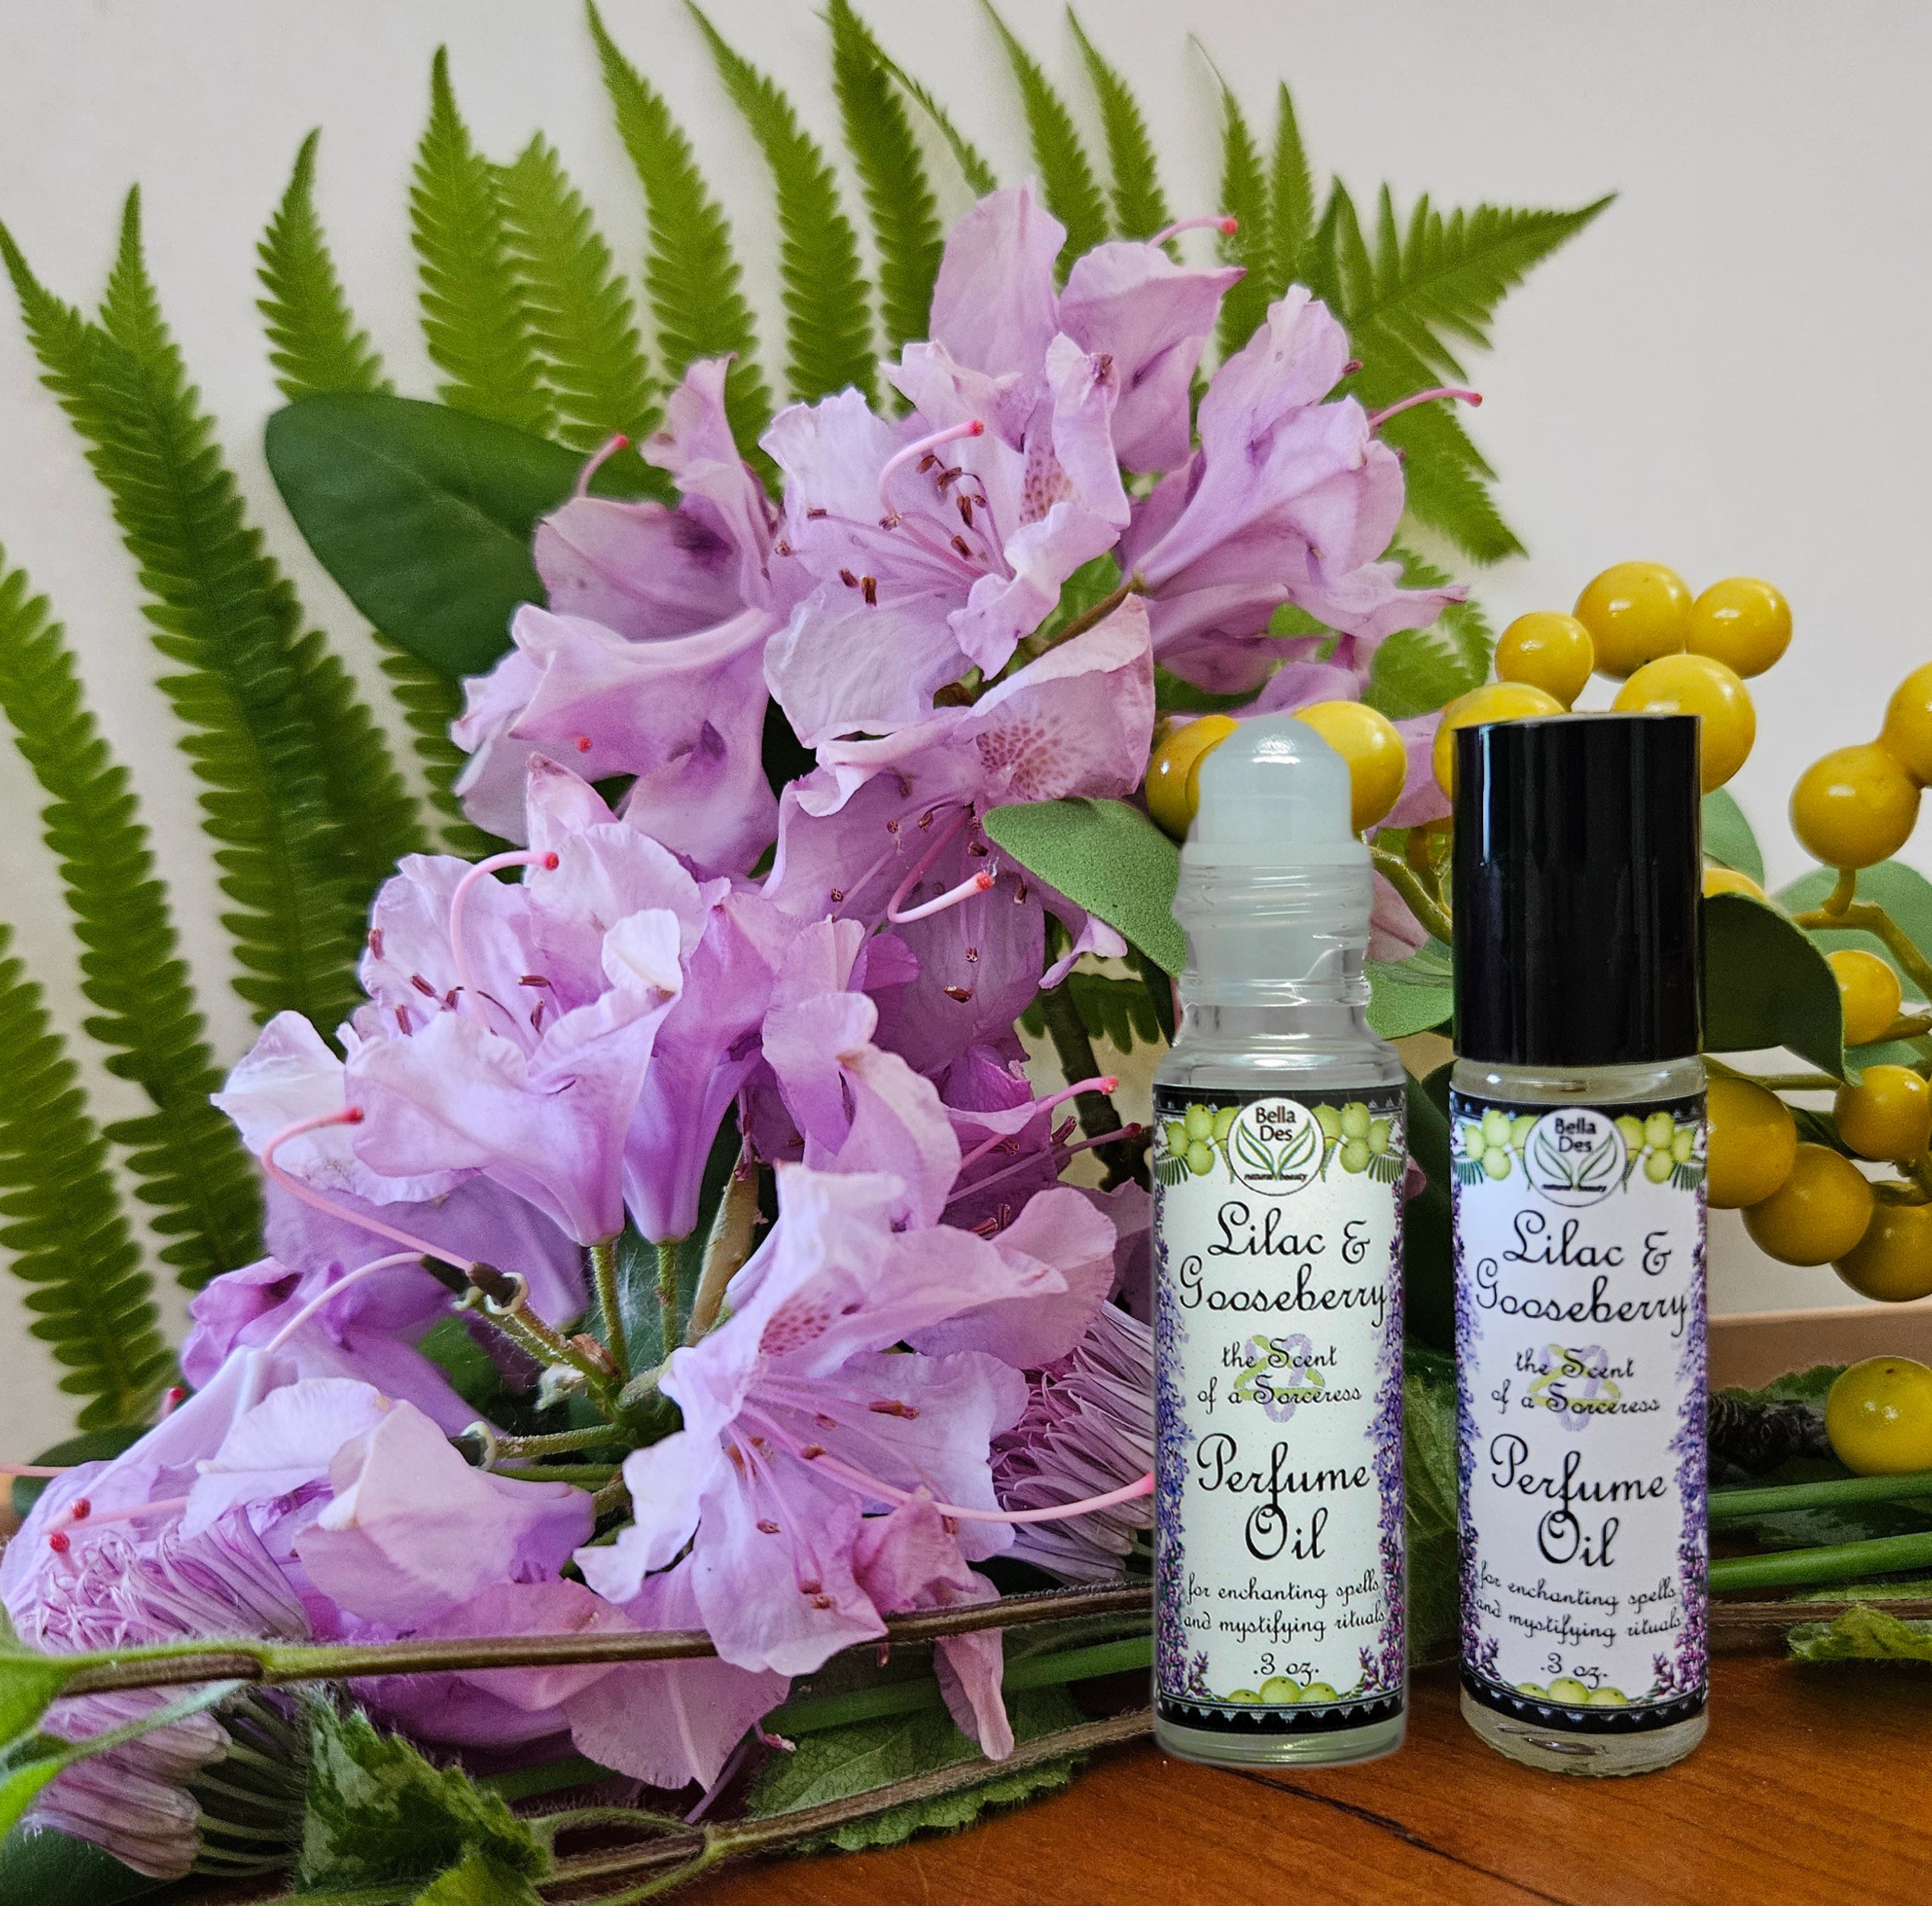 TIMELESS Asian Lilac Attar, artisan natural perfume oil has sweet floral  scent – TIMELESS Essential Oils